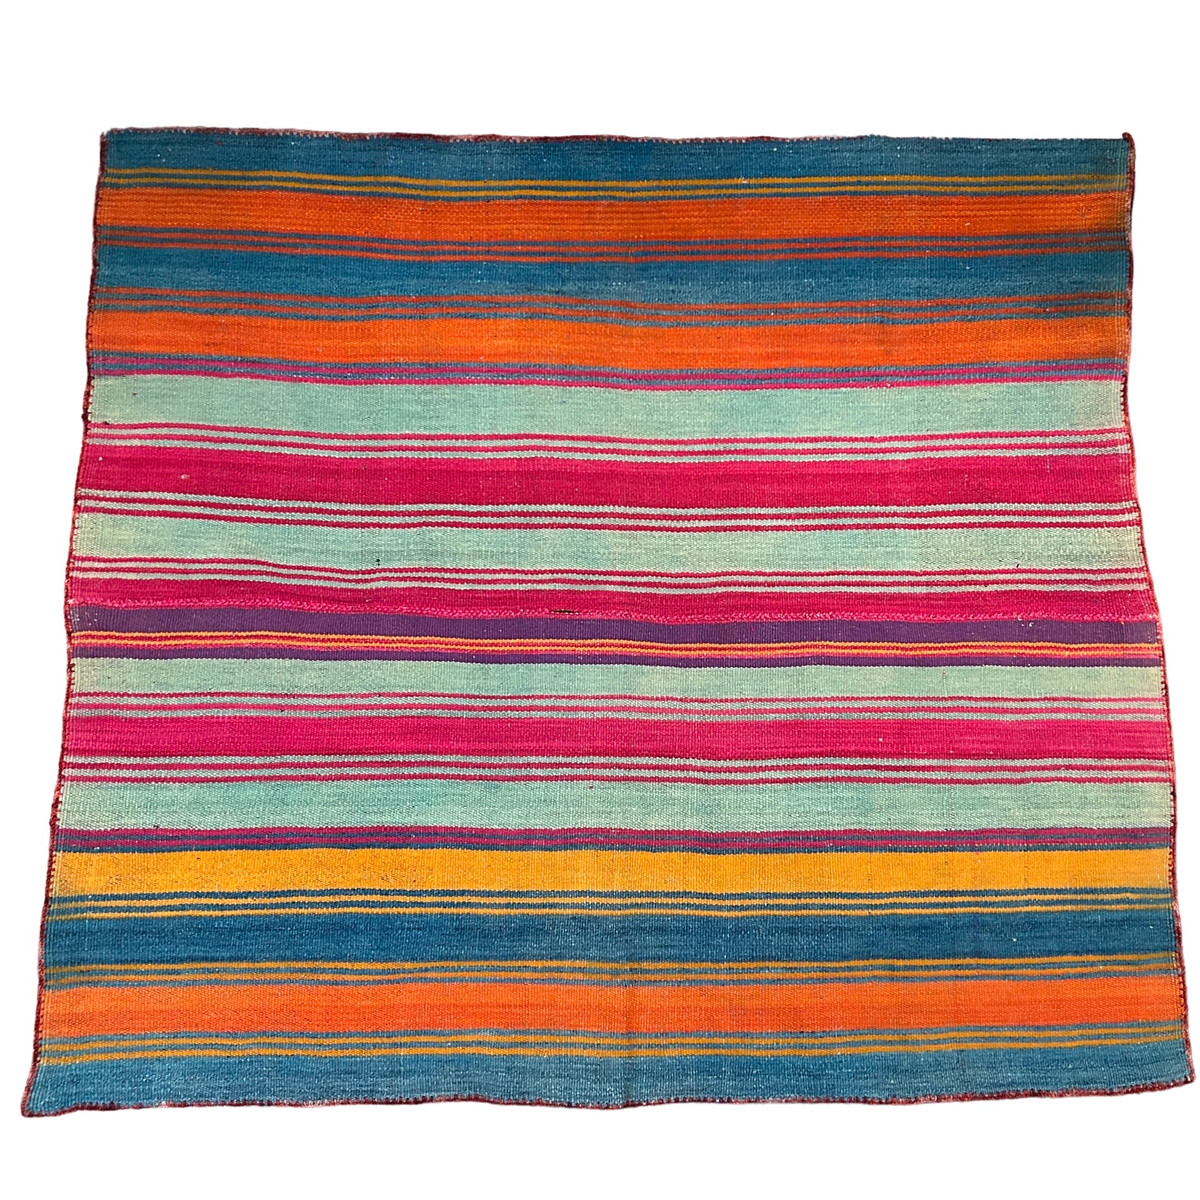 Our new collection of vintage hand woven wool frazadas are stunning!n   Hand woven in two panels from the mountains of Peru used by the Aymara or Quechua people that live in the high Andes. This is a heavier throw but beautiful draped on the couch or the foot of the bed. This would also be beautiful on the wall. Vintage condition with some minor spots or discolorations. 100% wool. Colors: teal blue, burnt orange, seafoam, purple and old gold. There is a mottled brick colored crocheted edge around the whole blanket.